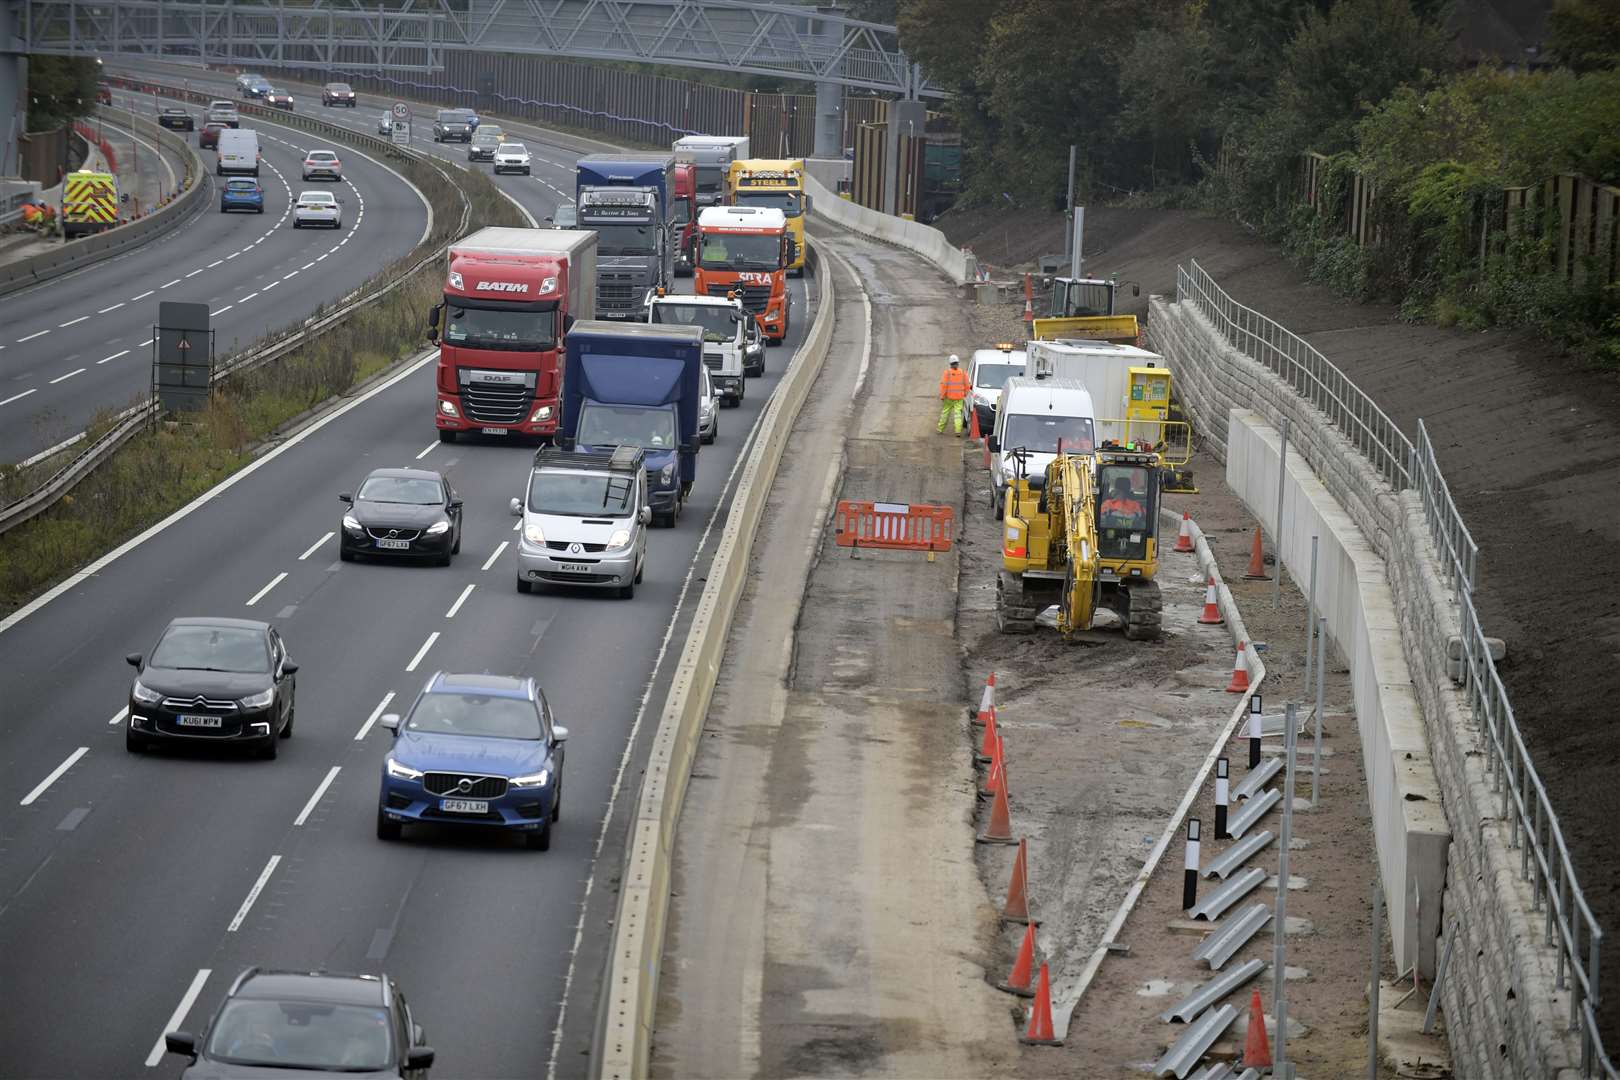 A Smart Motorway was constructed on the M20 between Junction 4 and Junction 5. Picture: Barry Goodwin